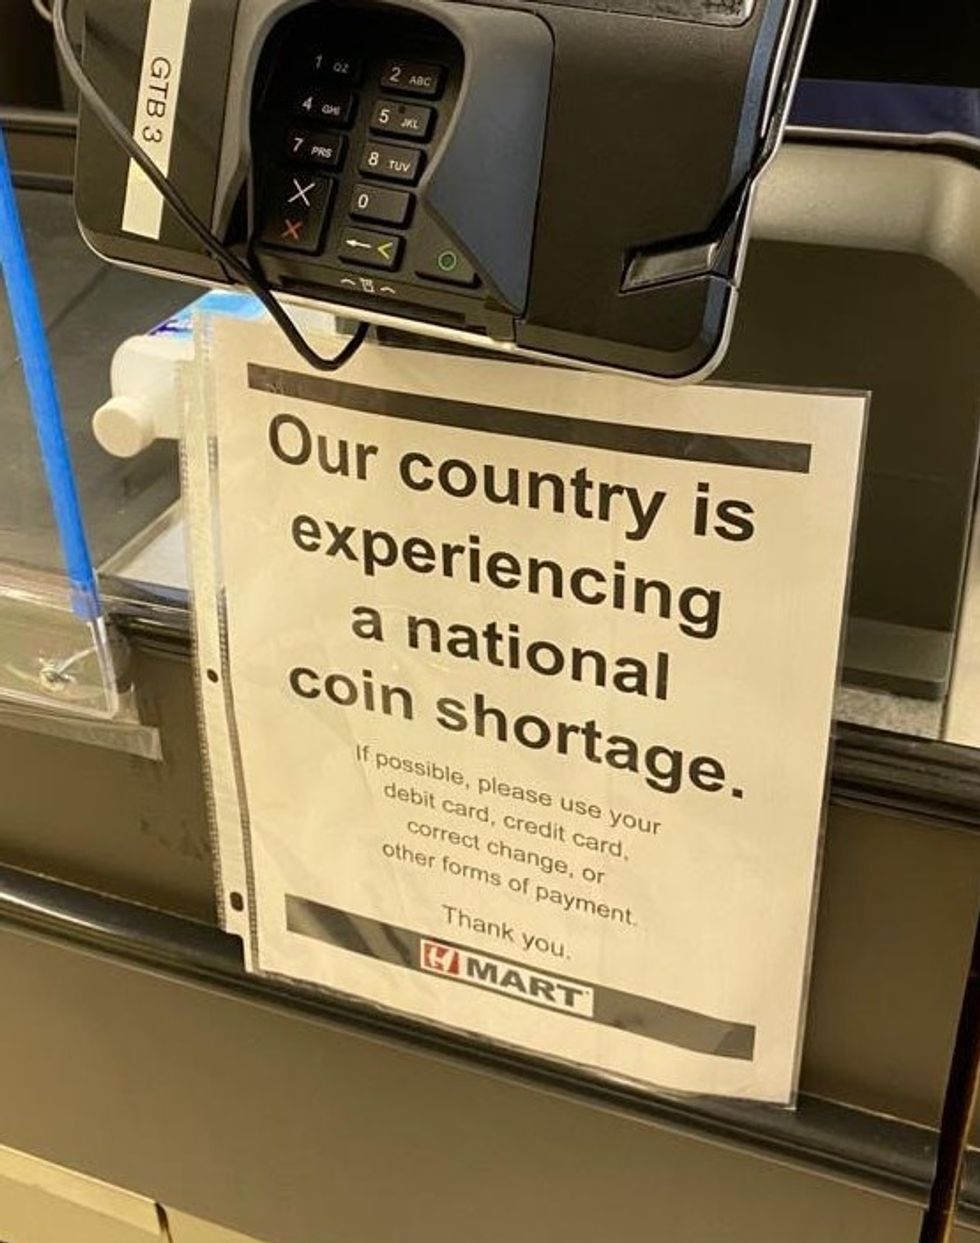 Sign under cash register which reads, "Our country is experiencing a national coin shortage. If possible, please use your debit card, credit card, correct change, or other forms of payment. Thank you."